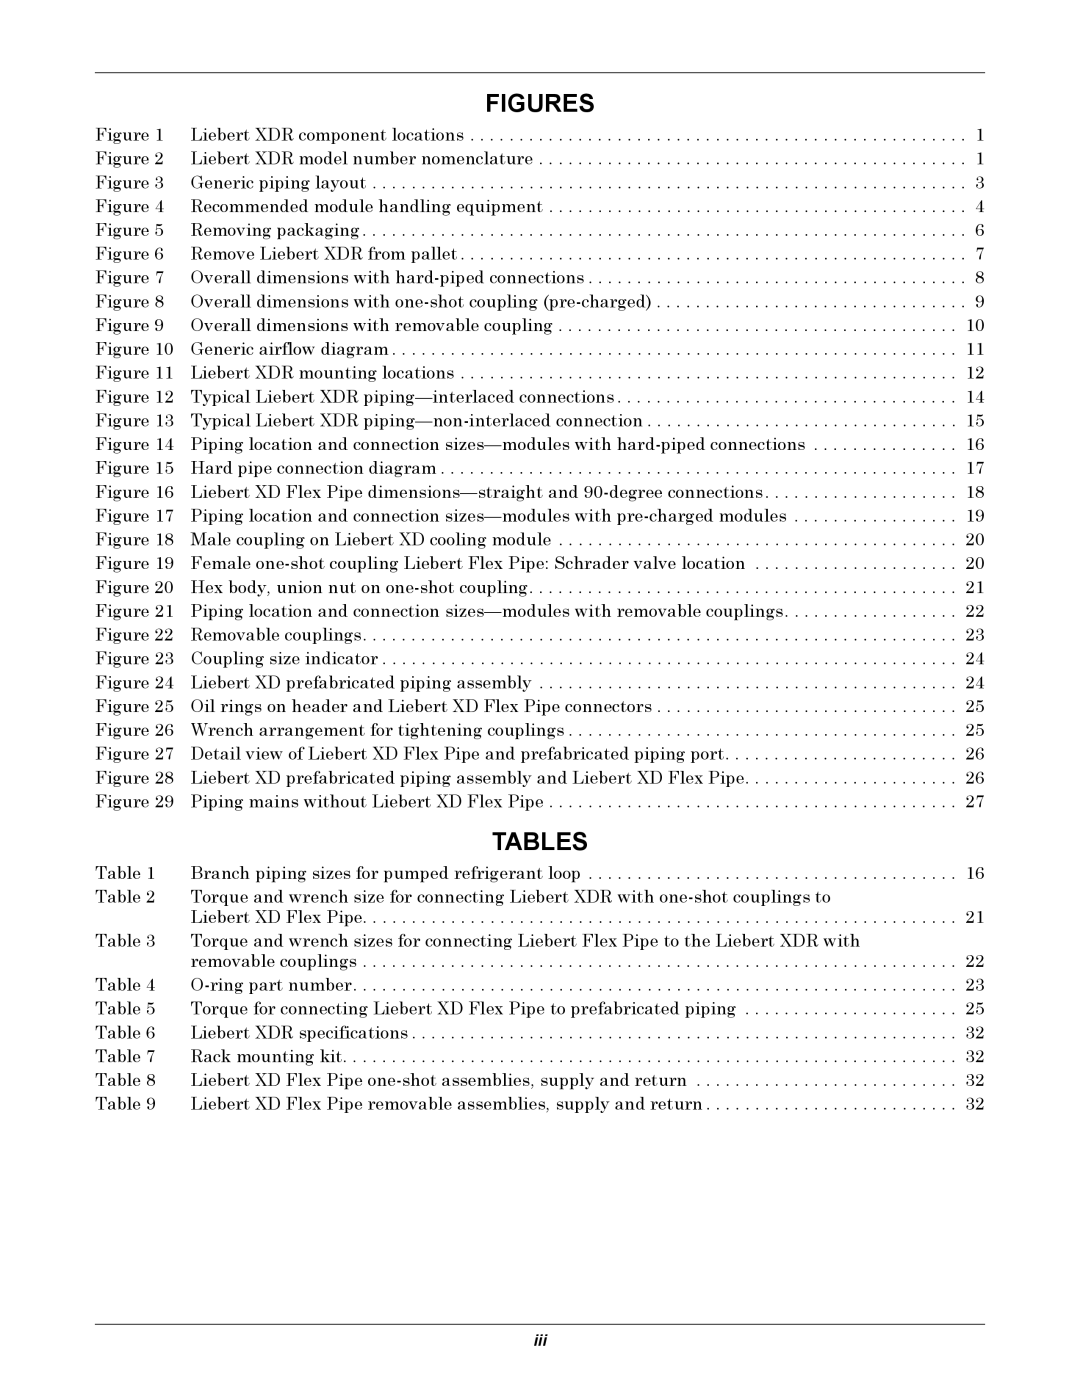 Emerson XDR user manual Figures, Tables 